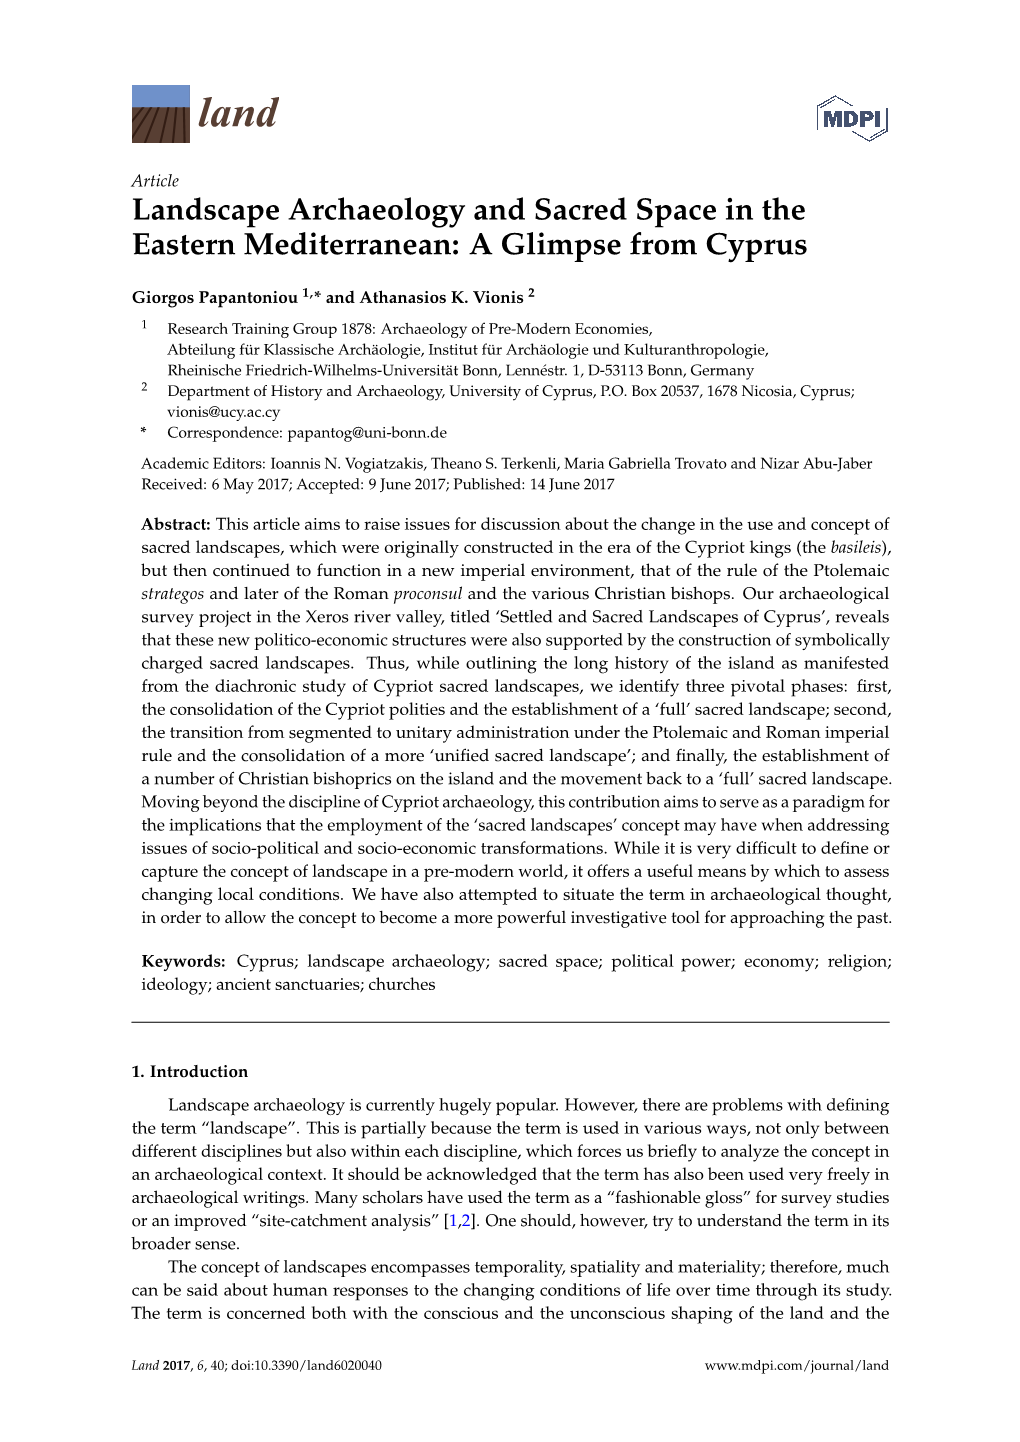 Landscape Archaeology and Sacred Space in the Eastern Mediterranean: a Glimpse from Cyprus